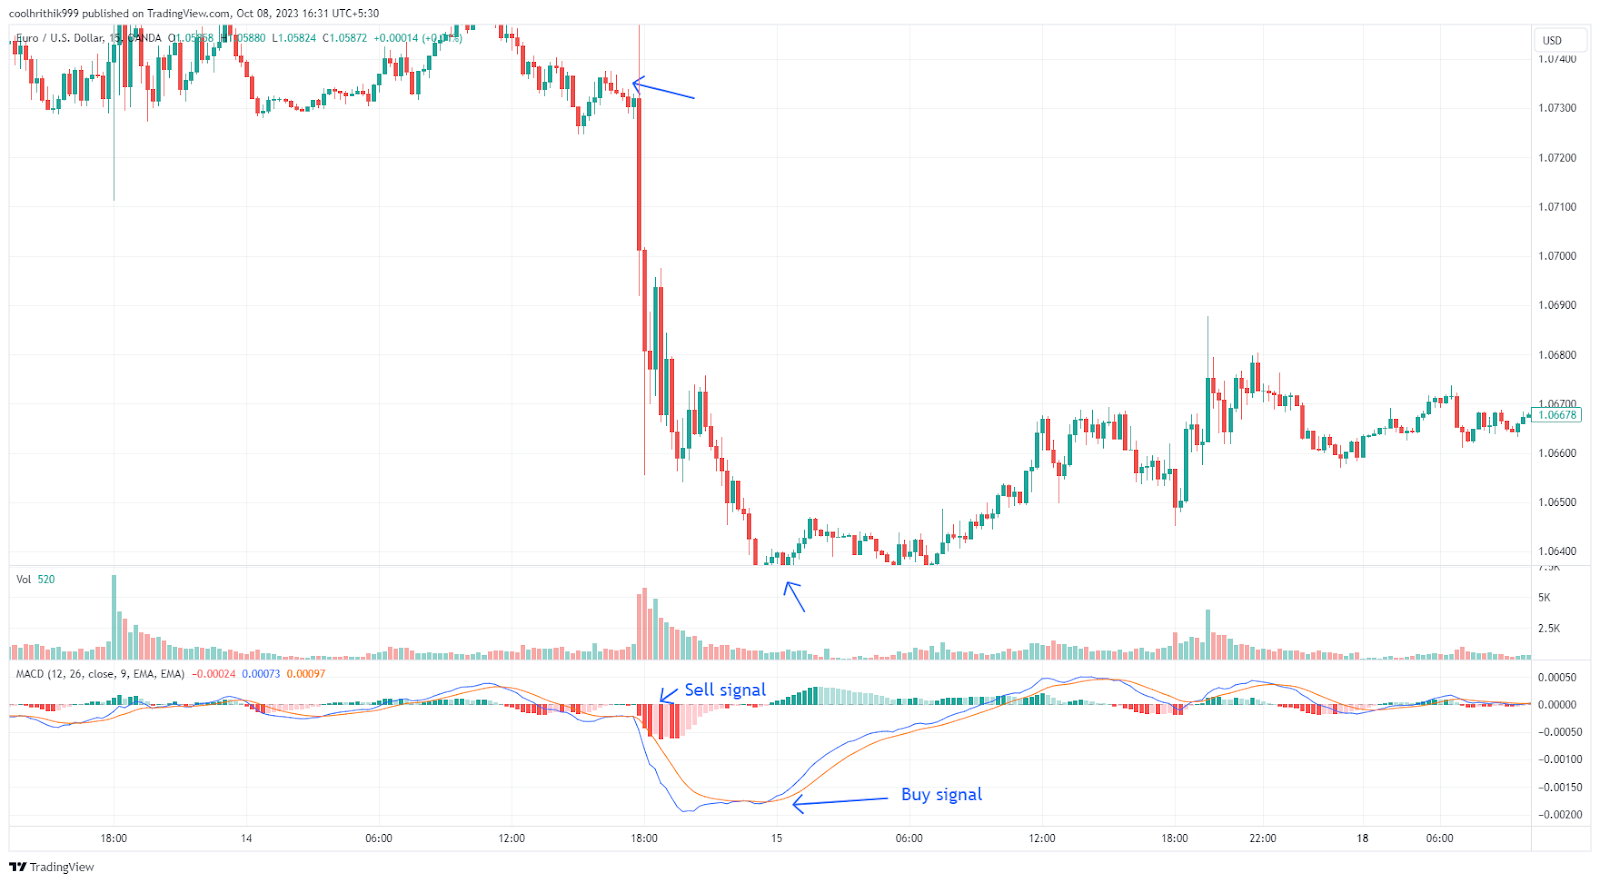 The MACD strategy